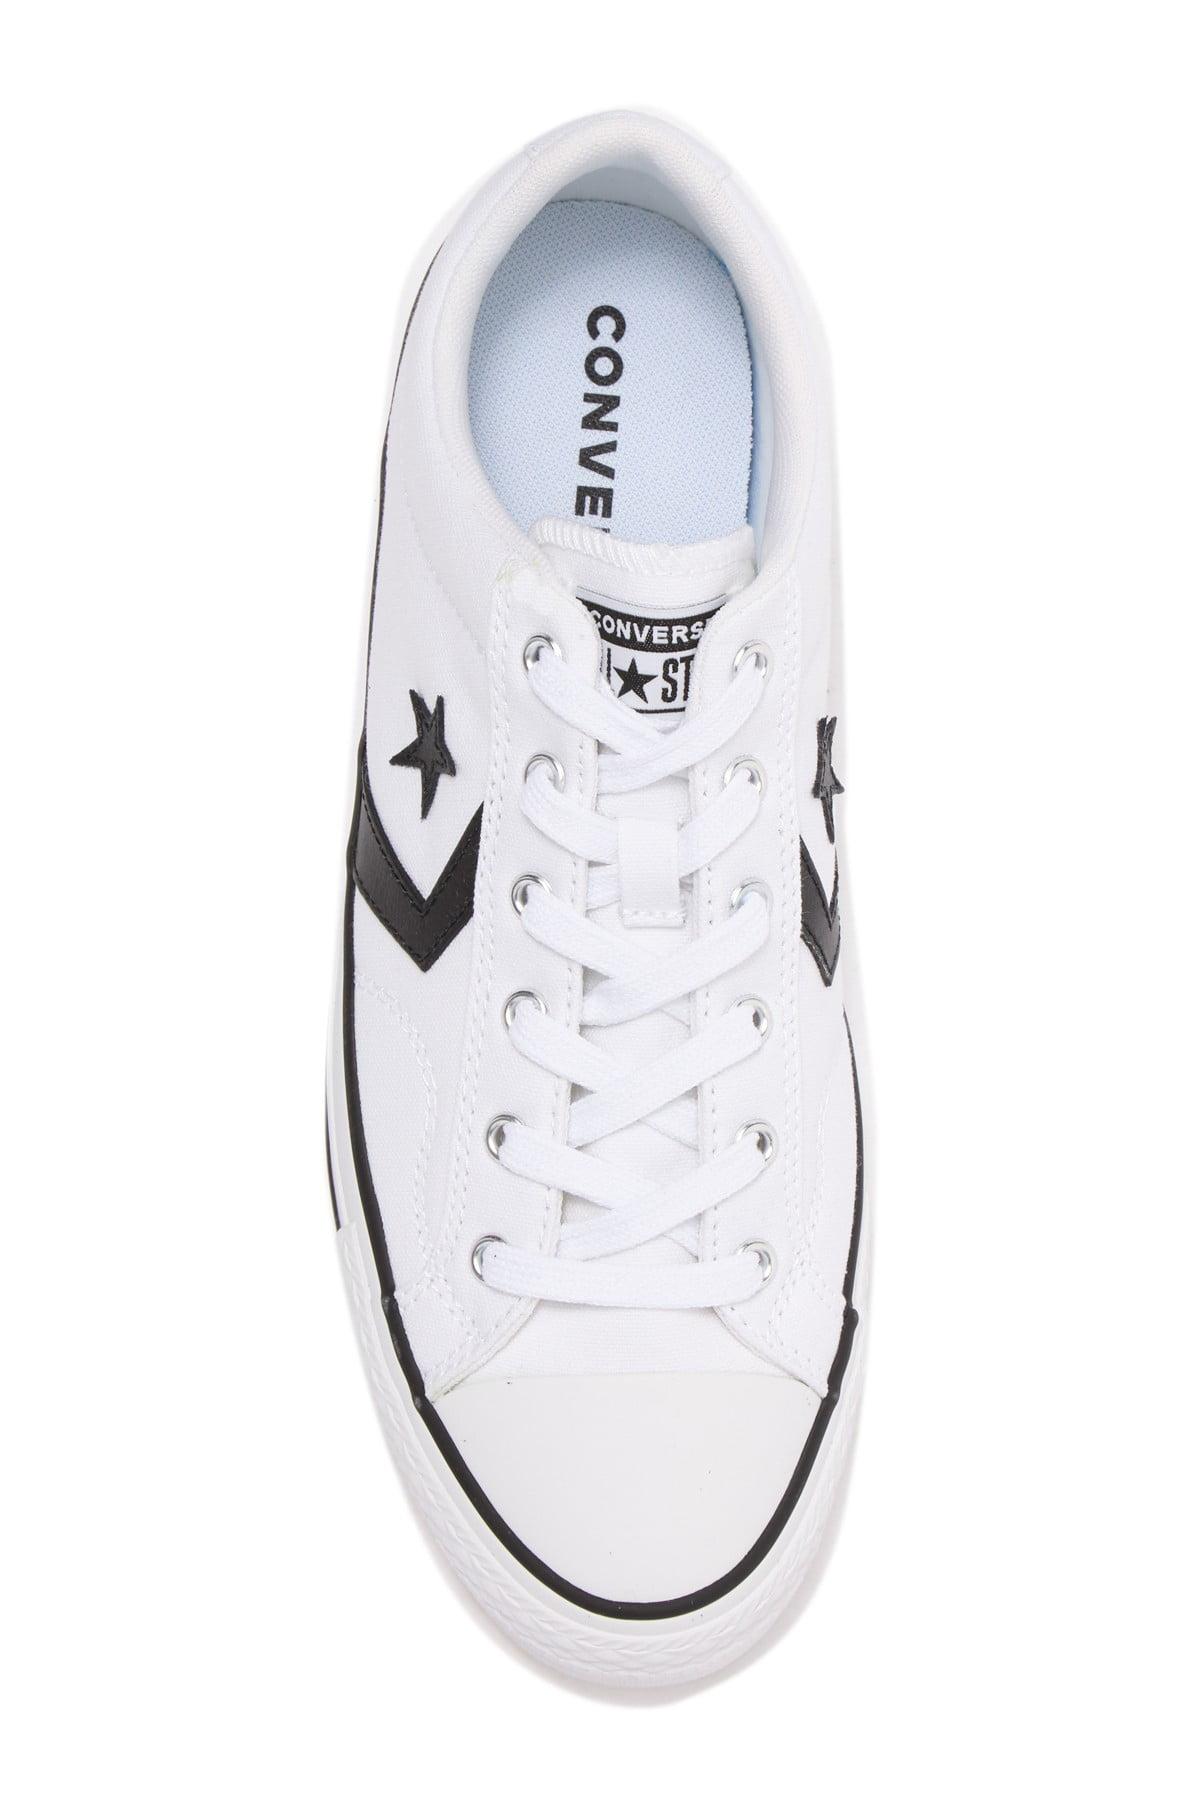 Converse Lace Cons Star Player Ox Trainers in White/Black (White) | Lyst